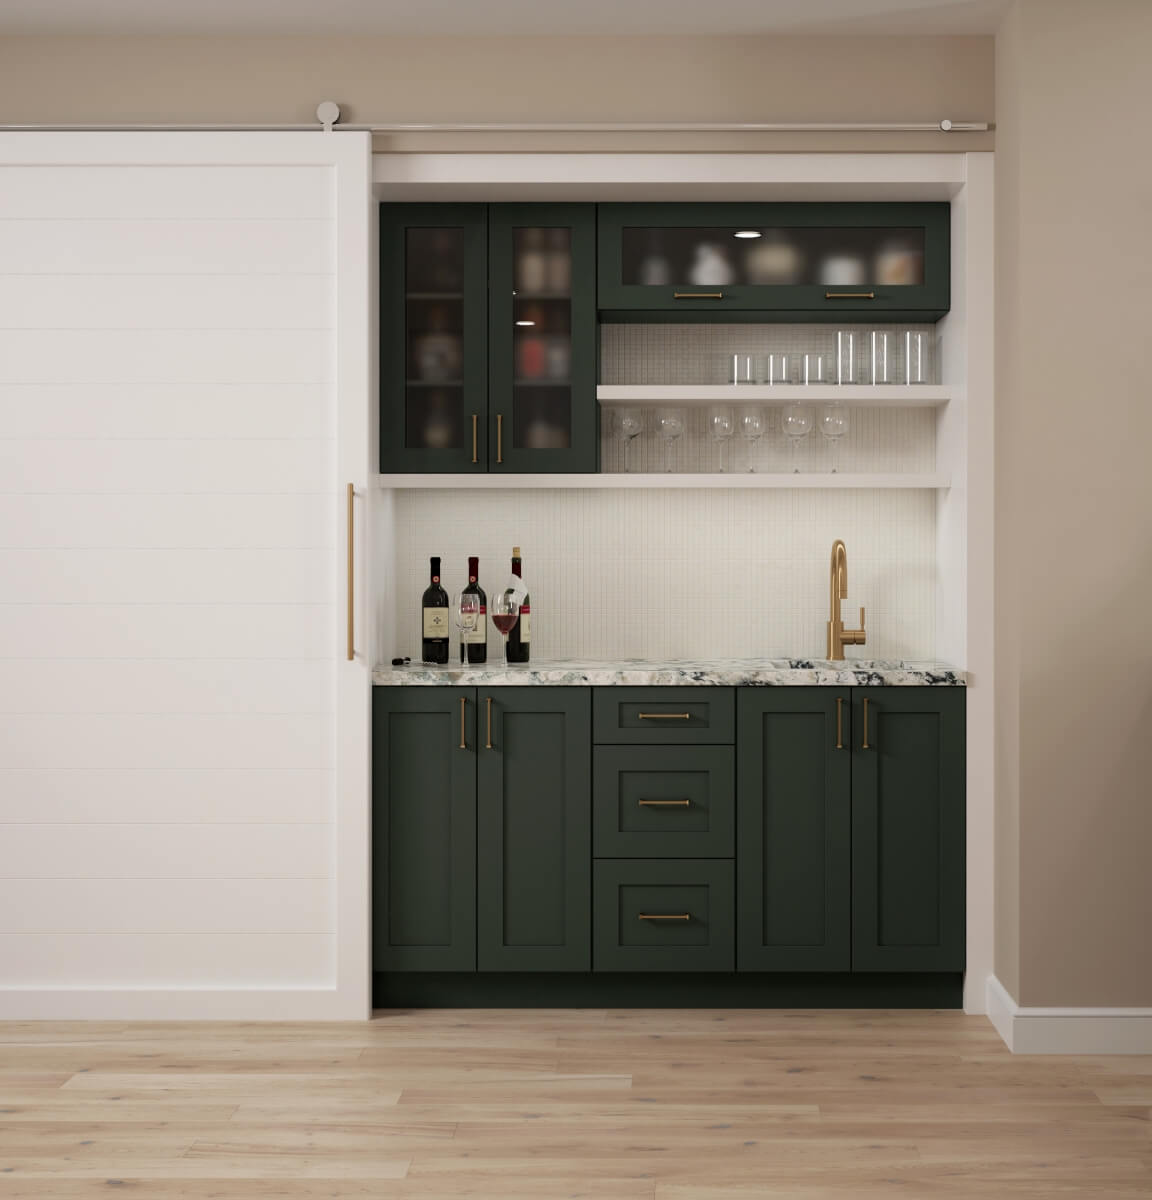 Dura Supreme cabinetry with a 